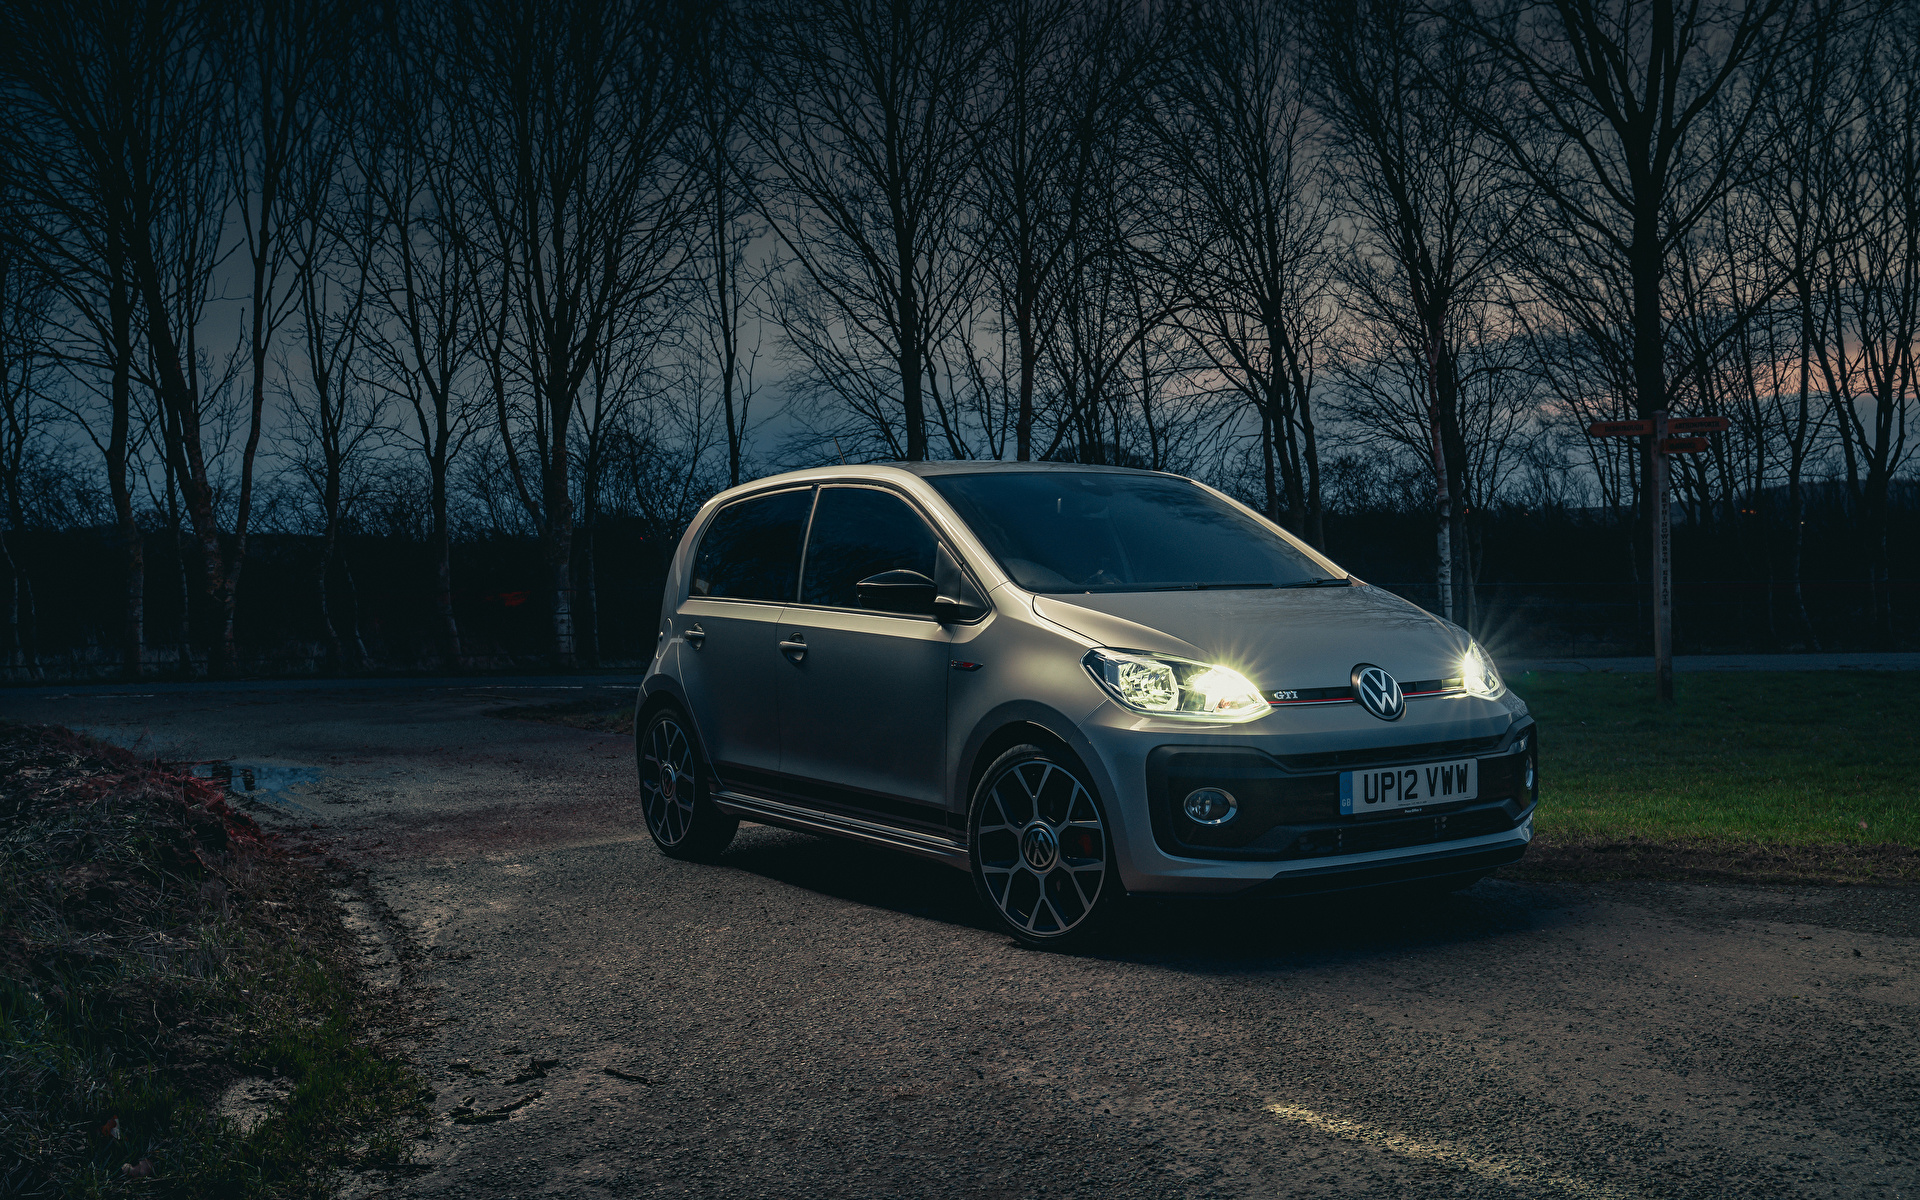 Picture 2020 Volkswagen up! GTI gray Cars 1920x1200 Grey auto automobile